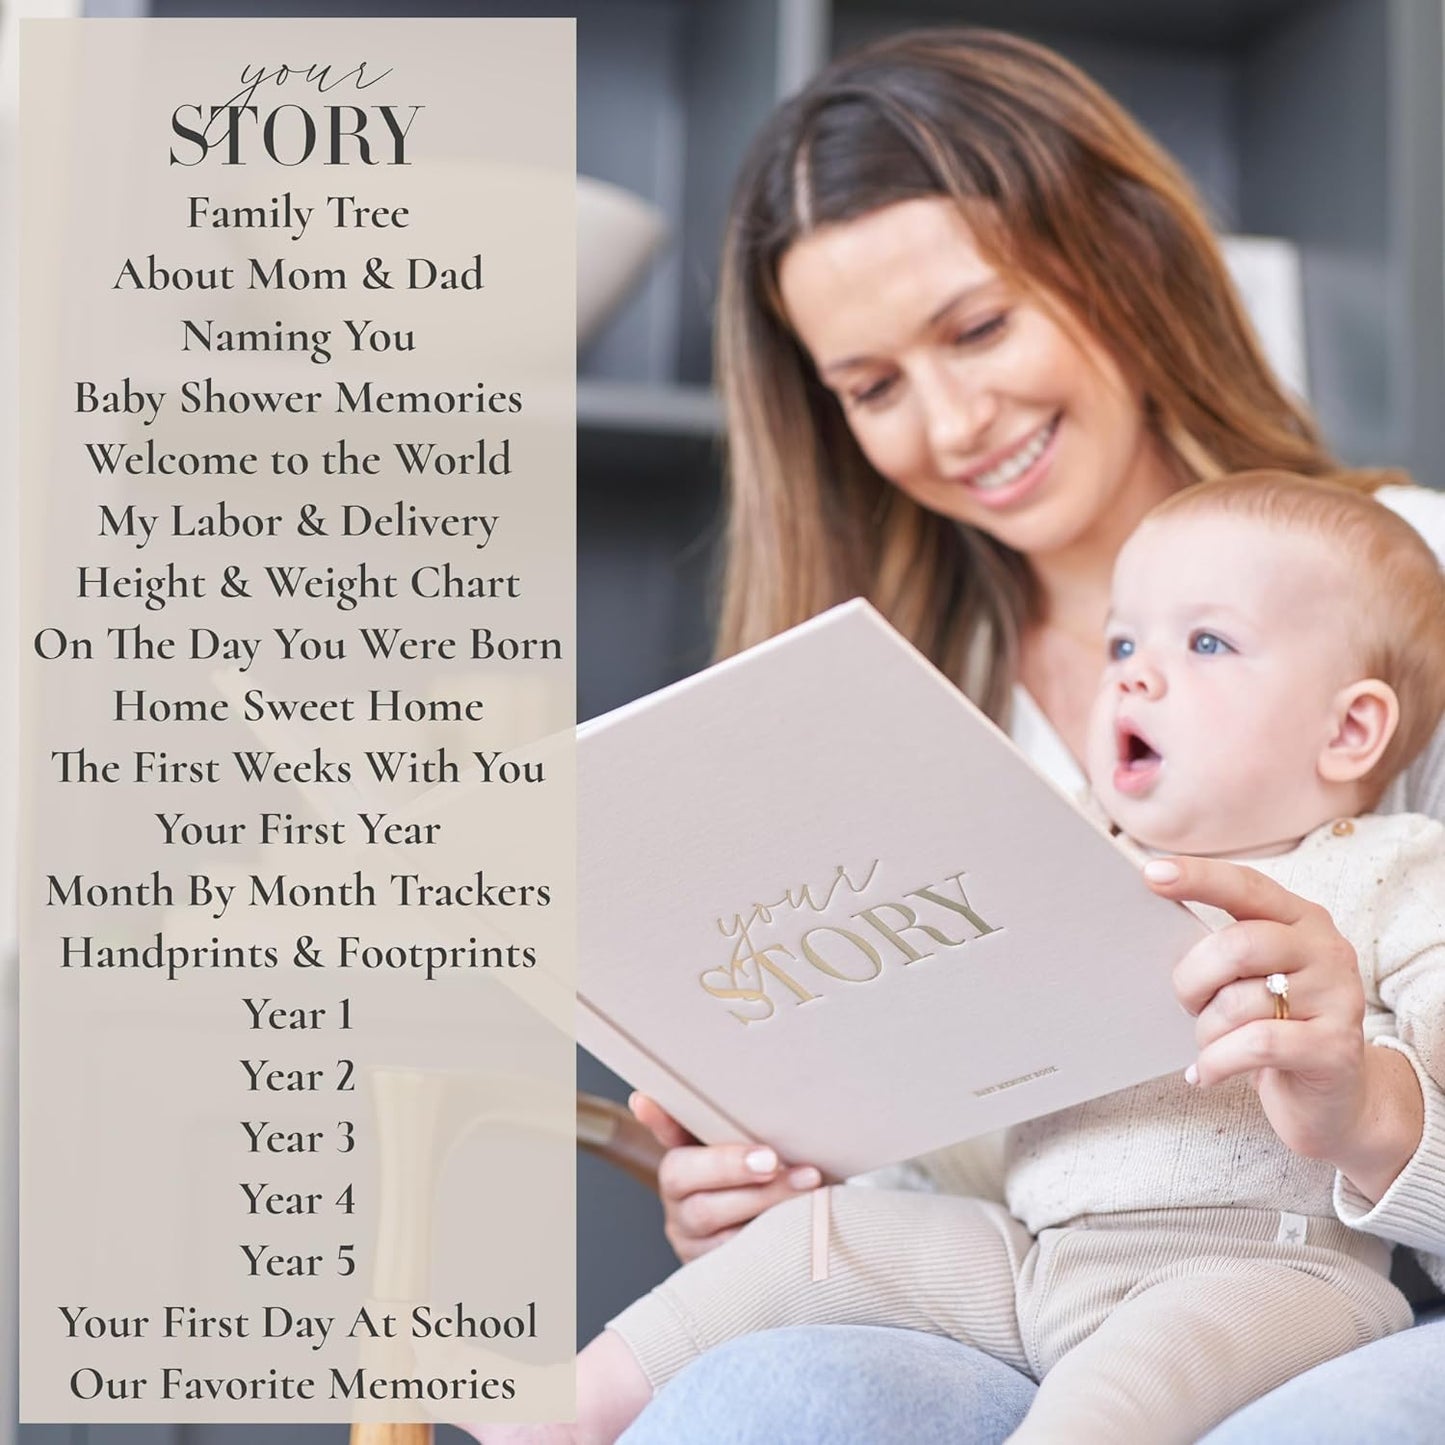 Baby Memory Book New Mom Gift - Your Story - Baby Record Book & Photo Album - Gift for Newborn Baby Boy & Girl, Great For Baby Showers (Cream)